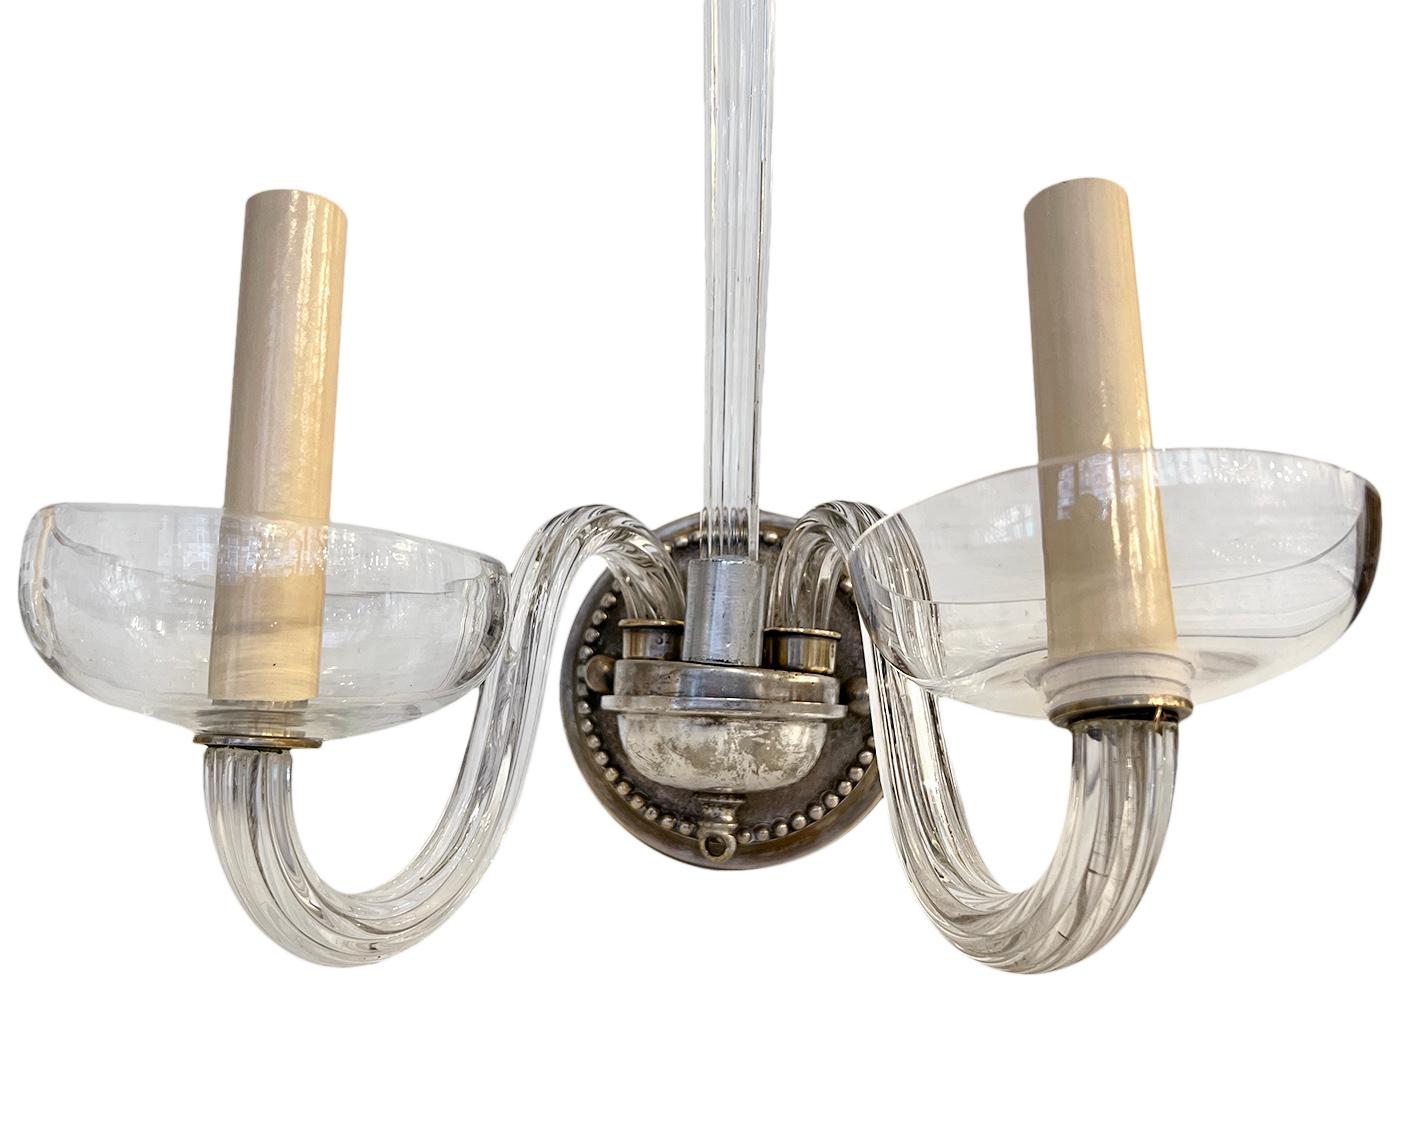 Pair of circa 1920's Italian blown glass sconces.

Measurements:
Height: 17